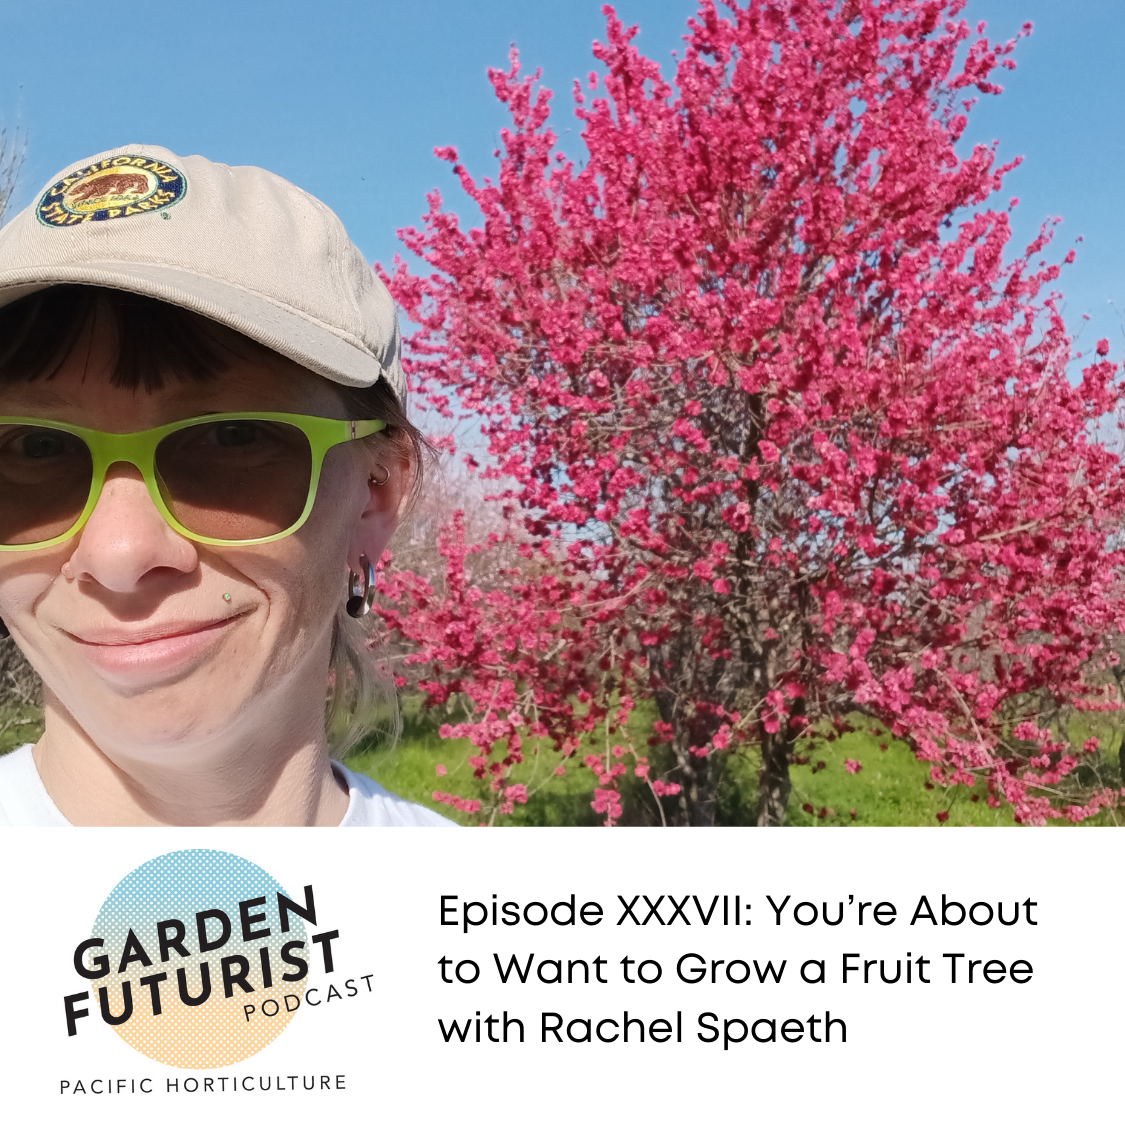 Garden Futurist Podcast: Episode XXXVII: You&#8217;re About to Want to Grow a Fruit Tree with Rachel Spaeth